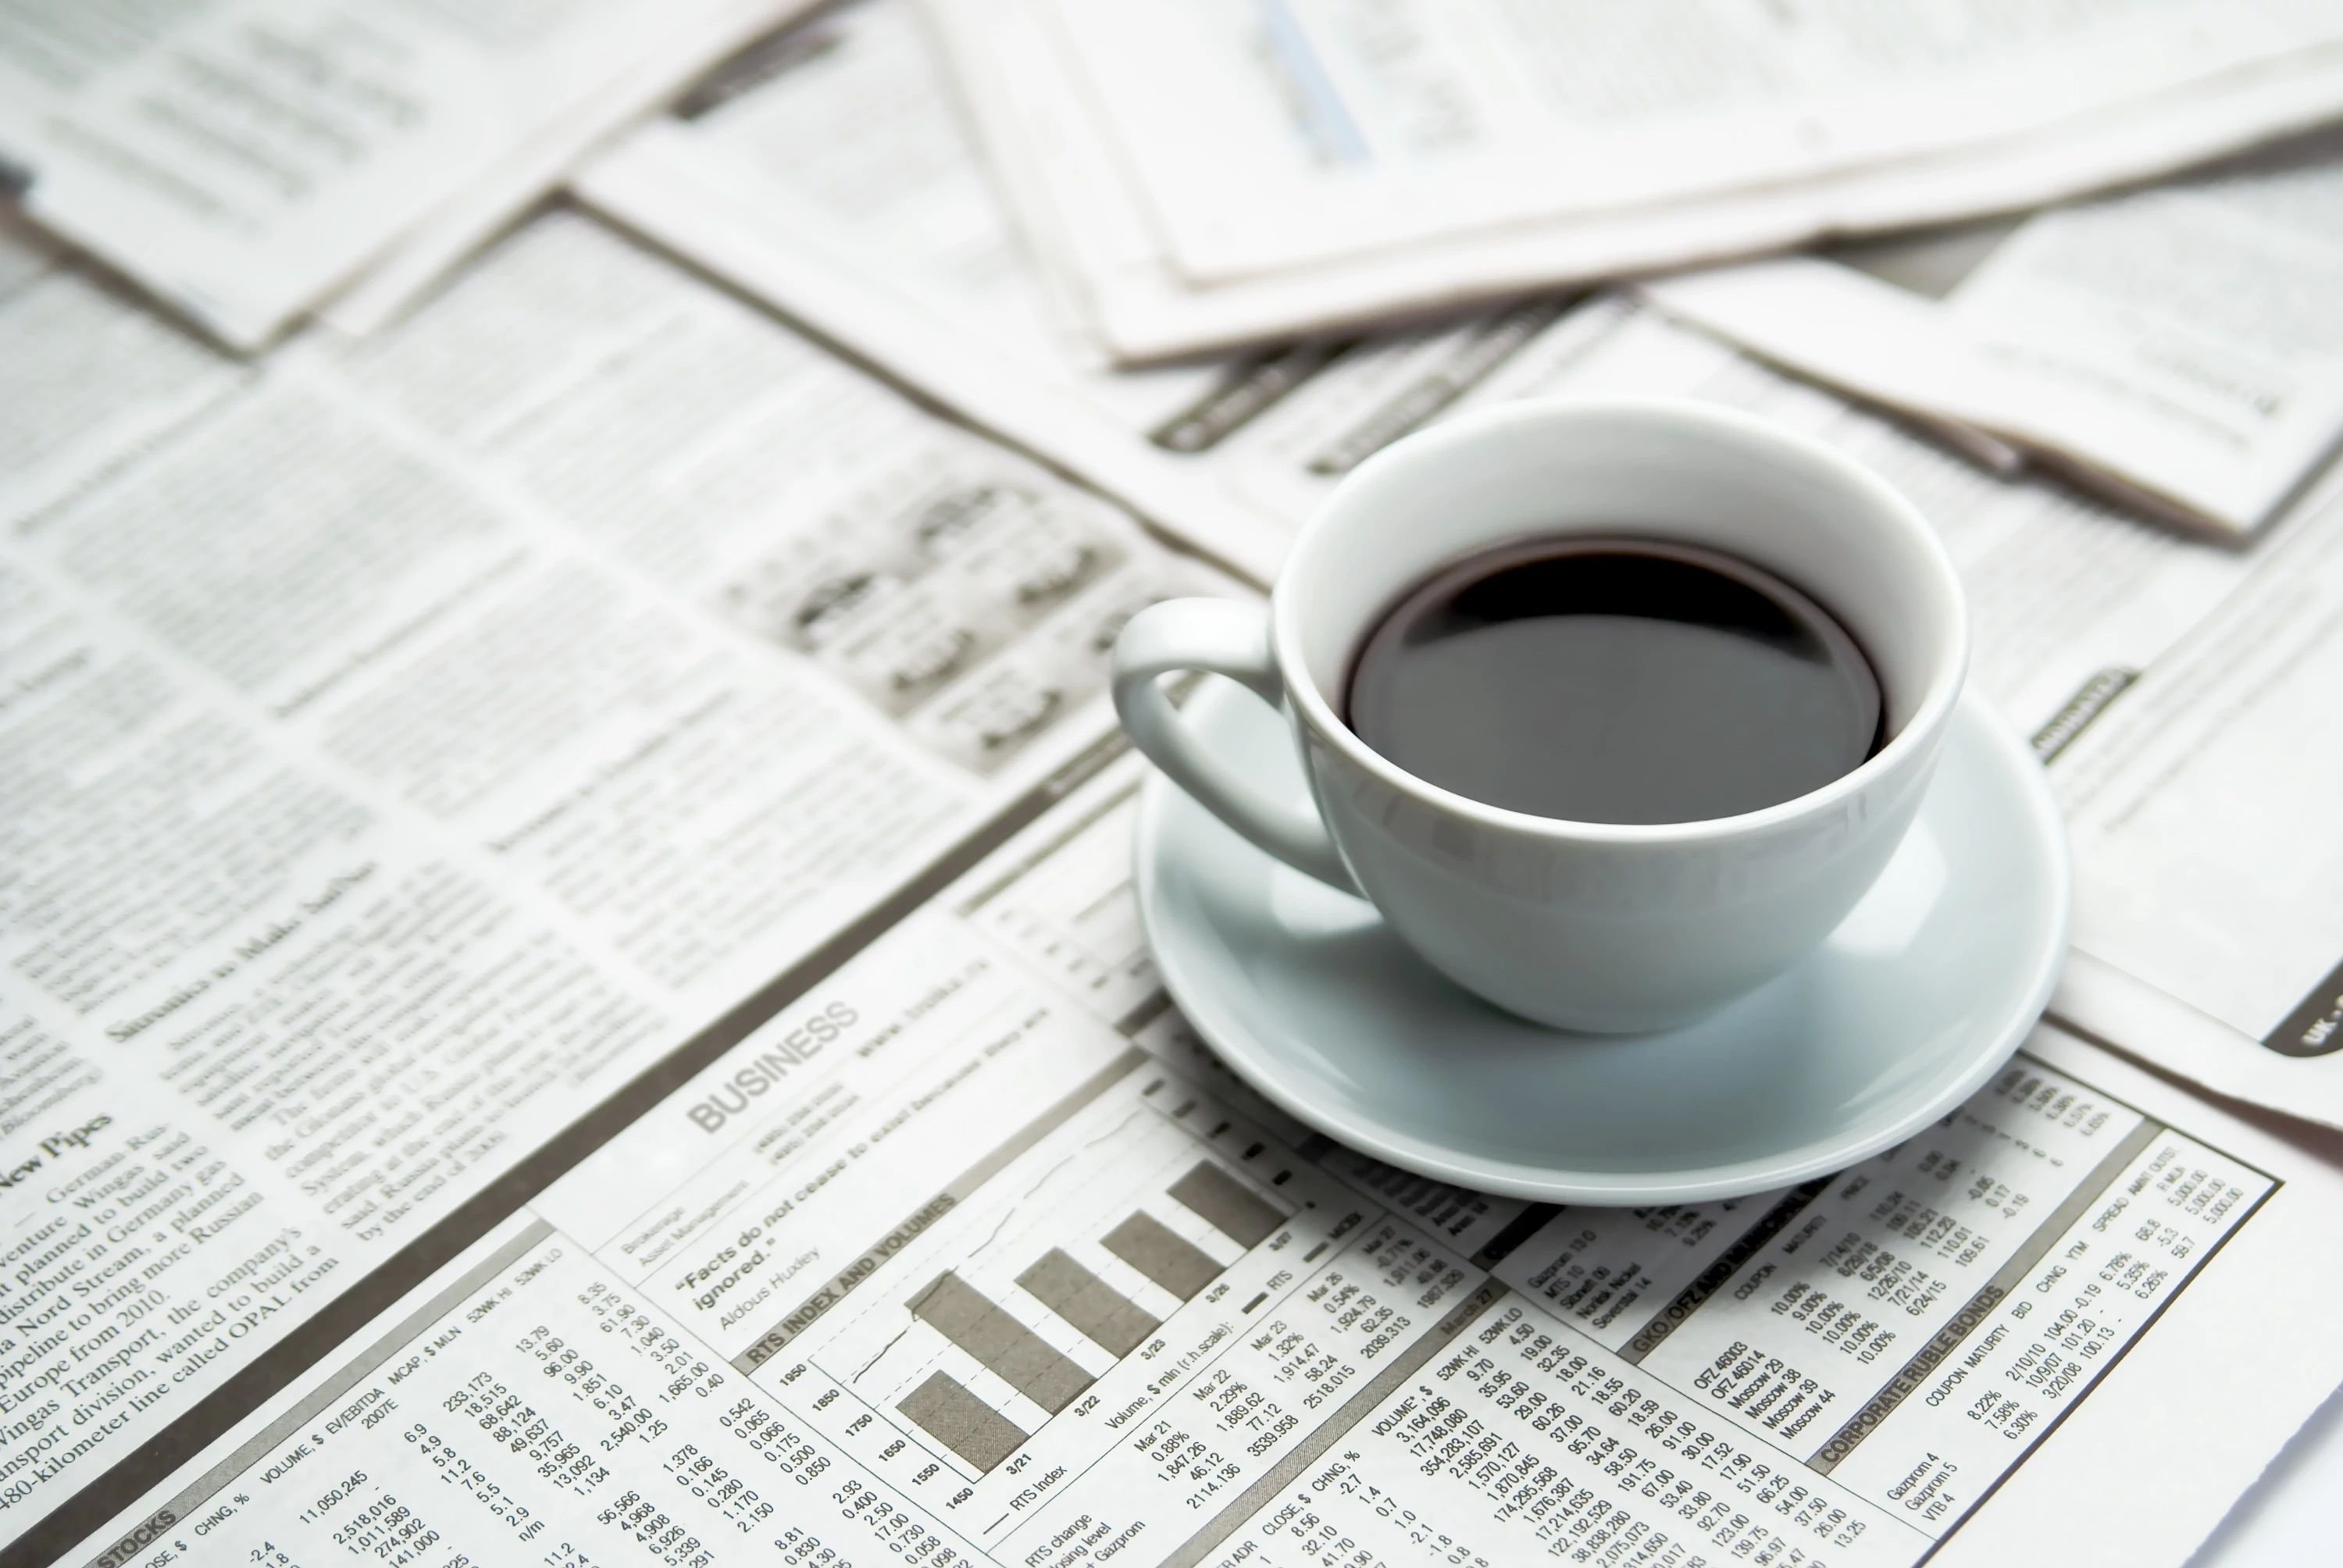 coffee on newspapers - from A.T. Frank Floors Across Michigan